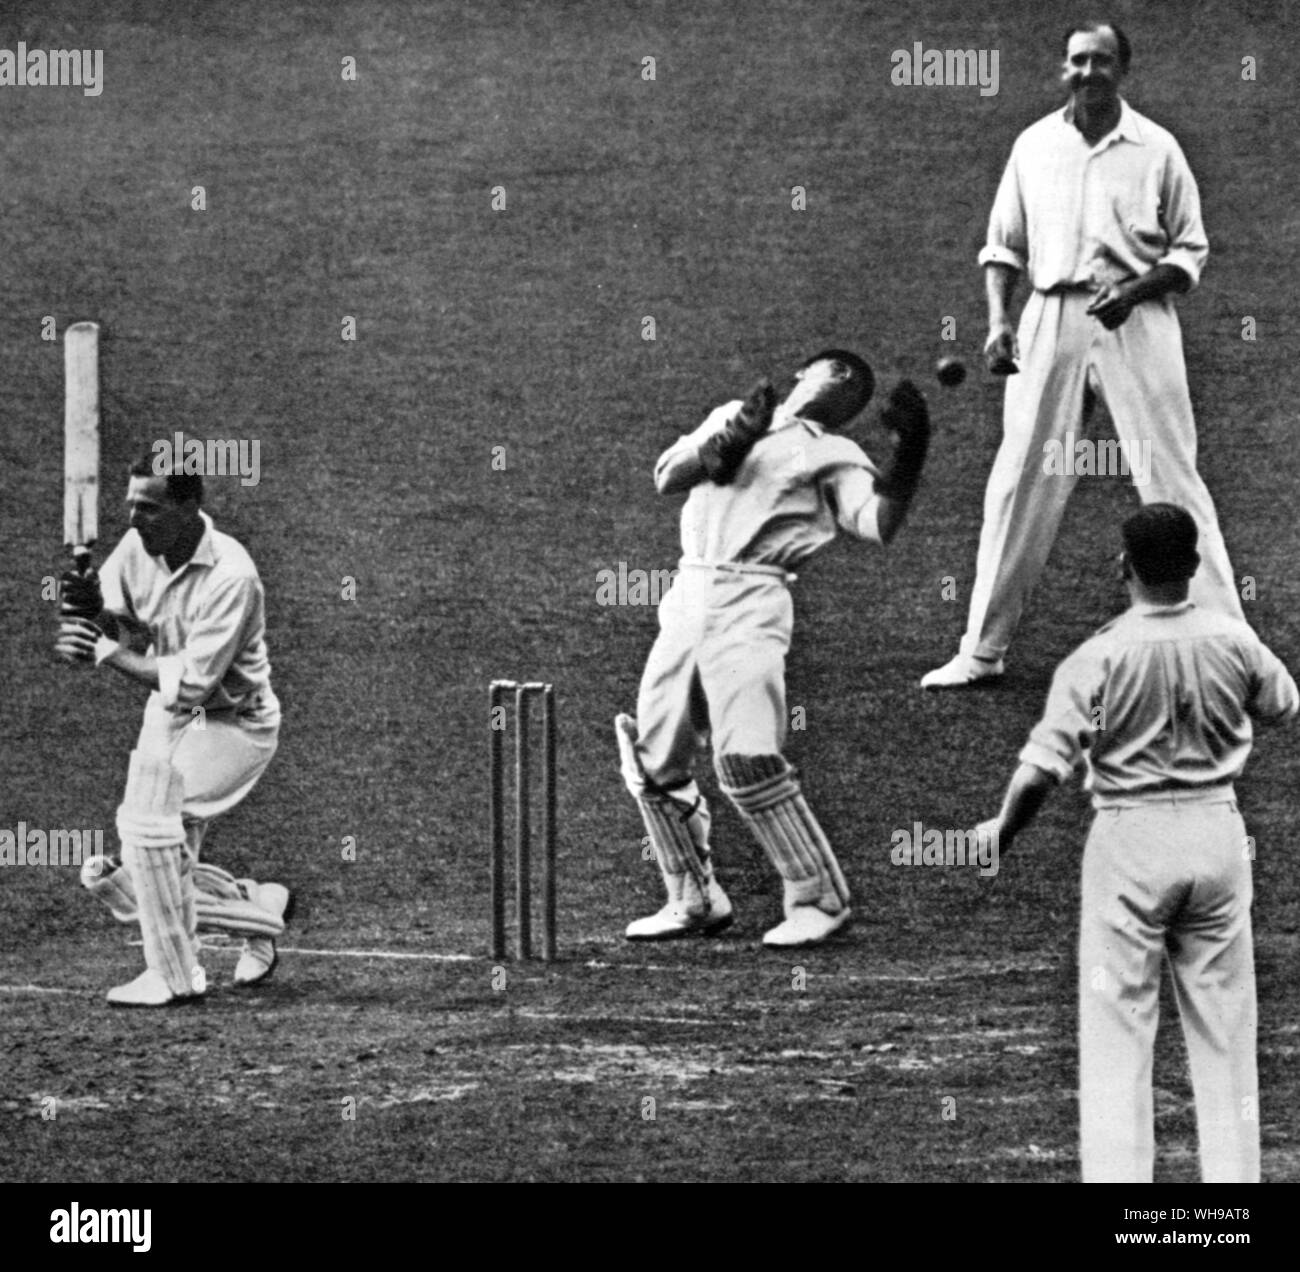 George Gunn being missed by H Strudwick the Surrey wicket keeper at the Oval 1927 P G H Fender is fielding slip Stock Photo